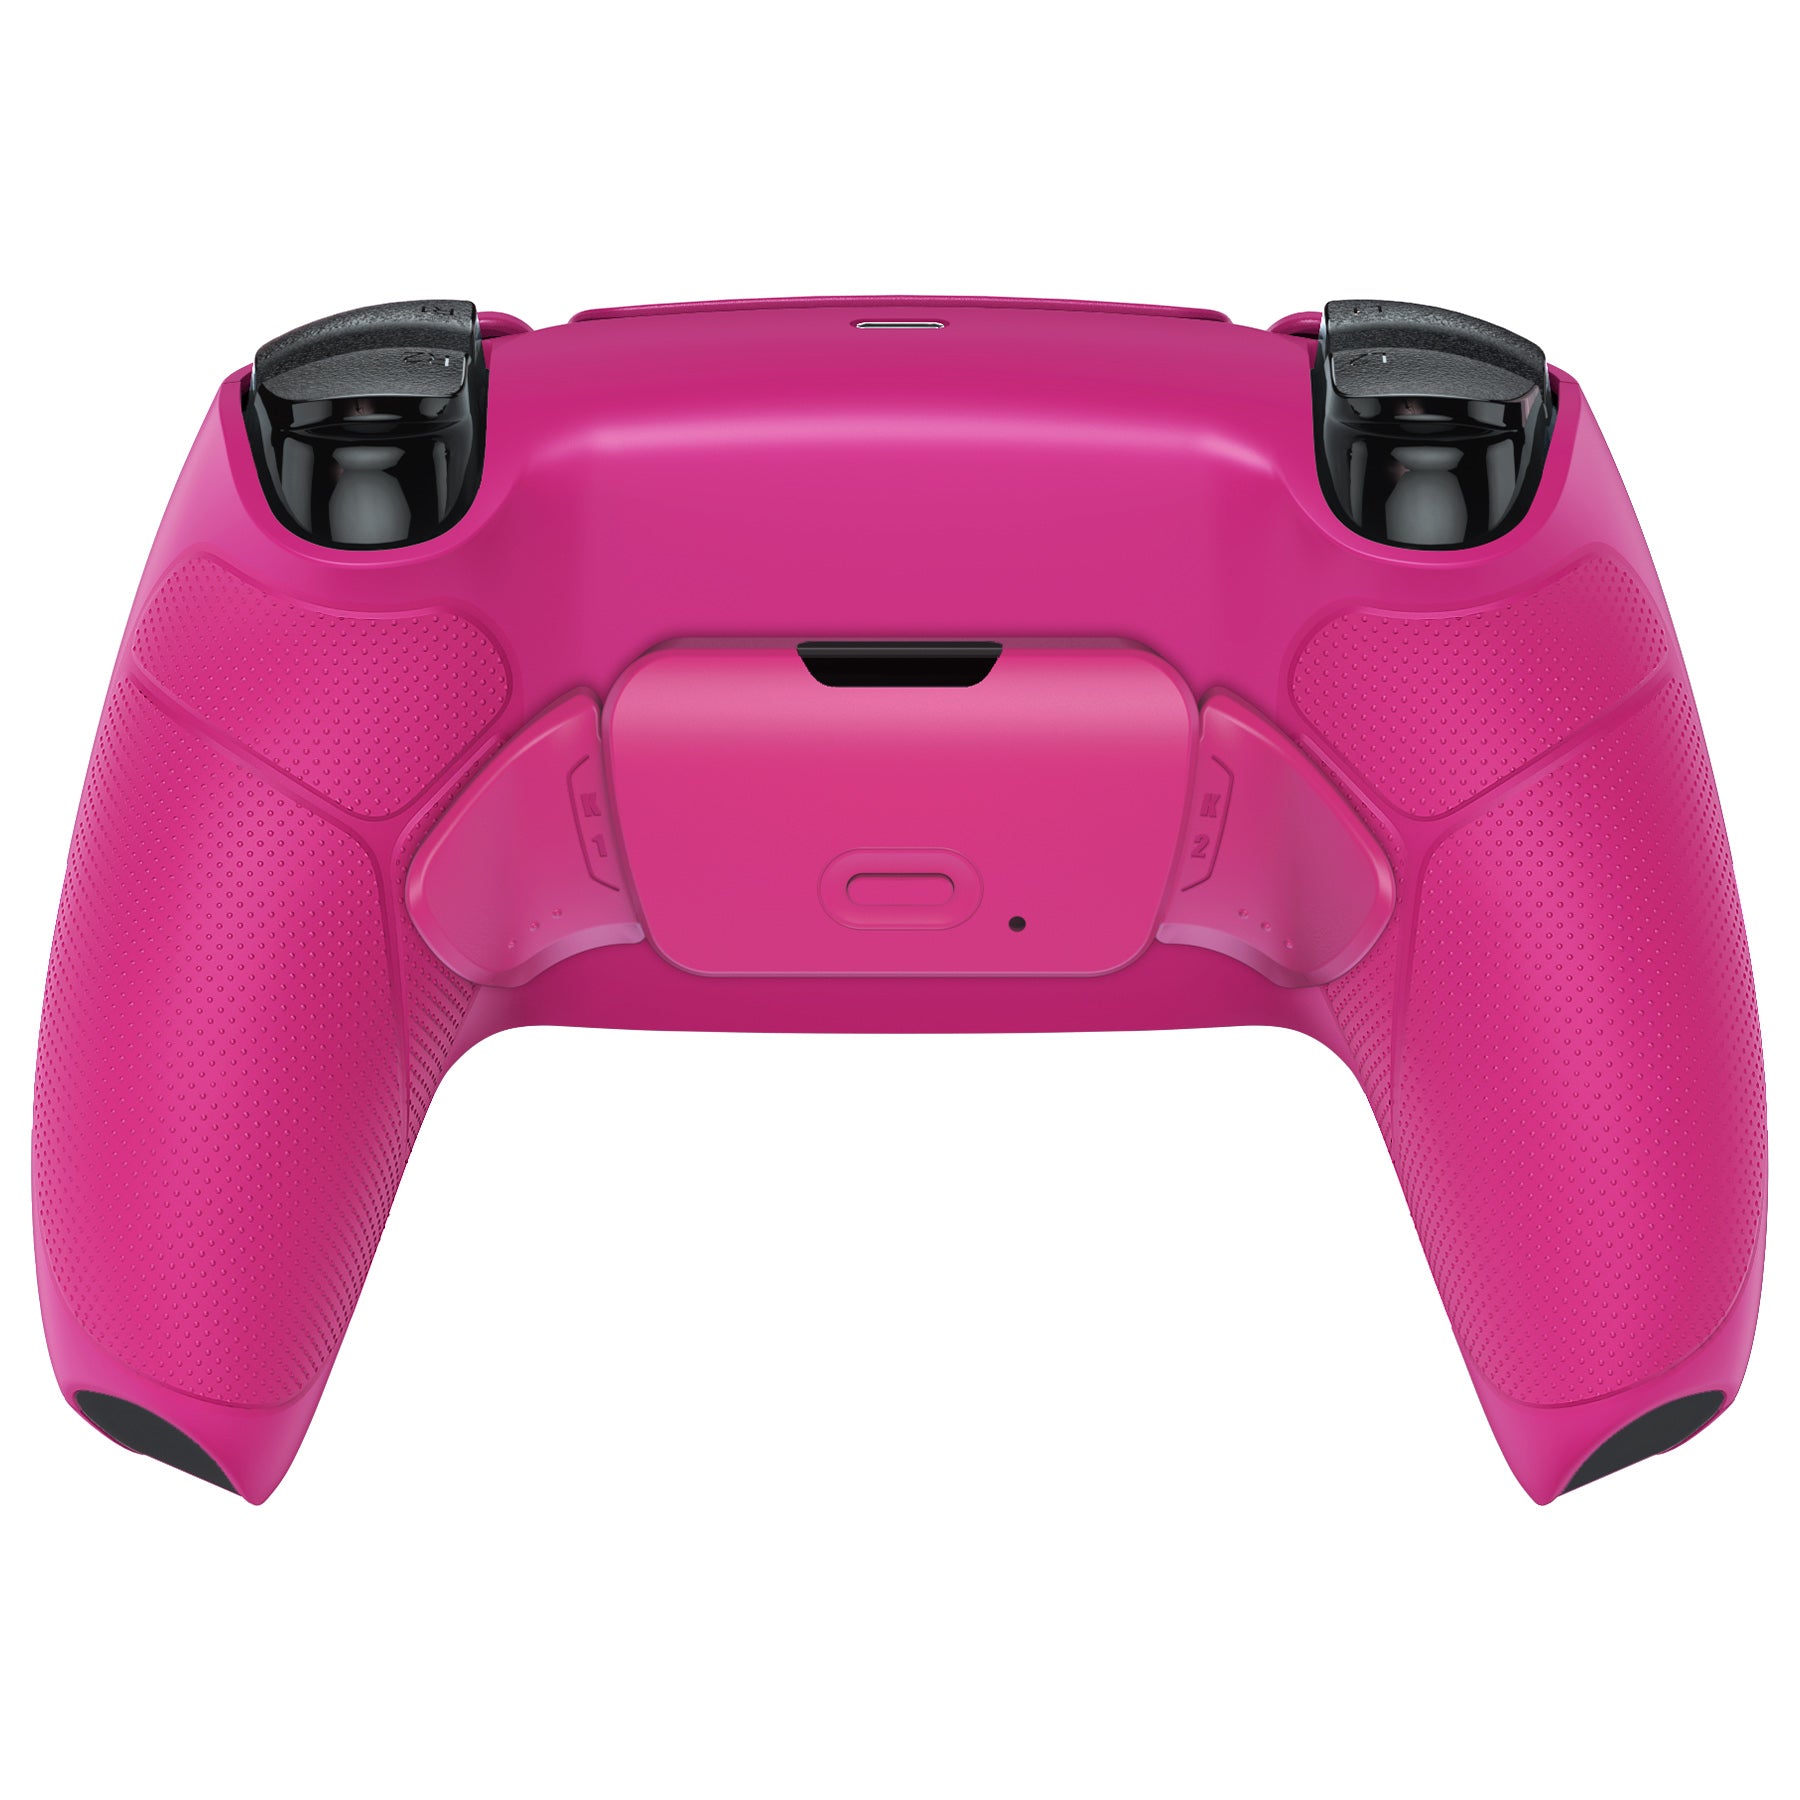 eXtremeRate Retail Nova Pink Rubberized Grip Back Paddles Remappable Rise Remap Kit with Upgrade Board & Redesigned Back Shell & Back Buttons Attachment for PS5 Controller BDM-010 & BDM-020 - XPFU6009